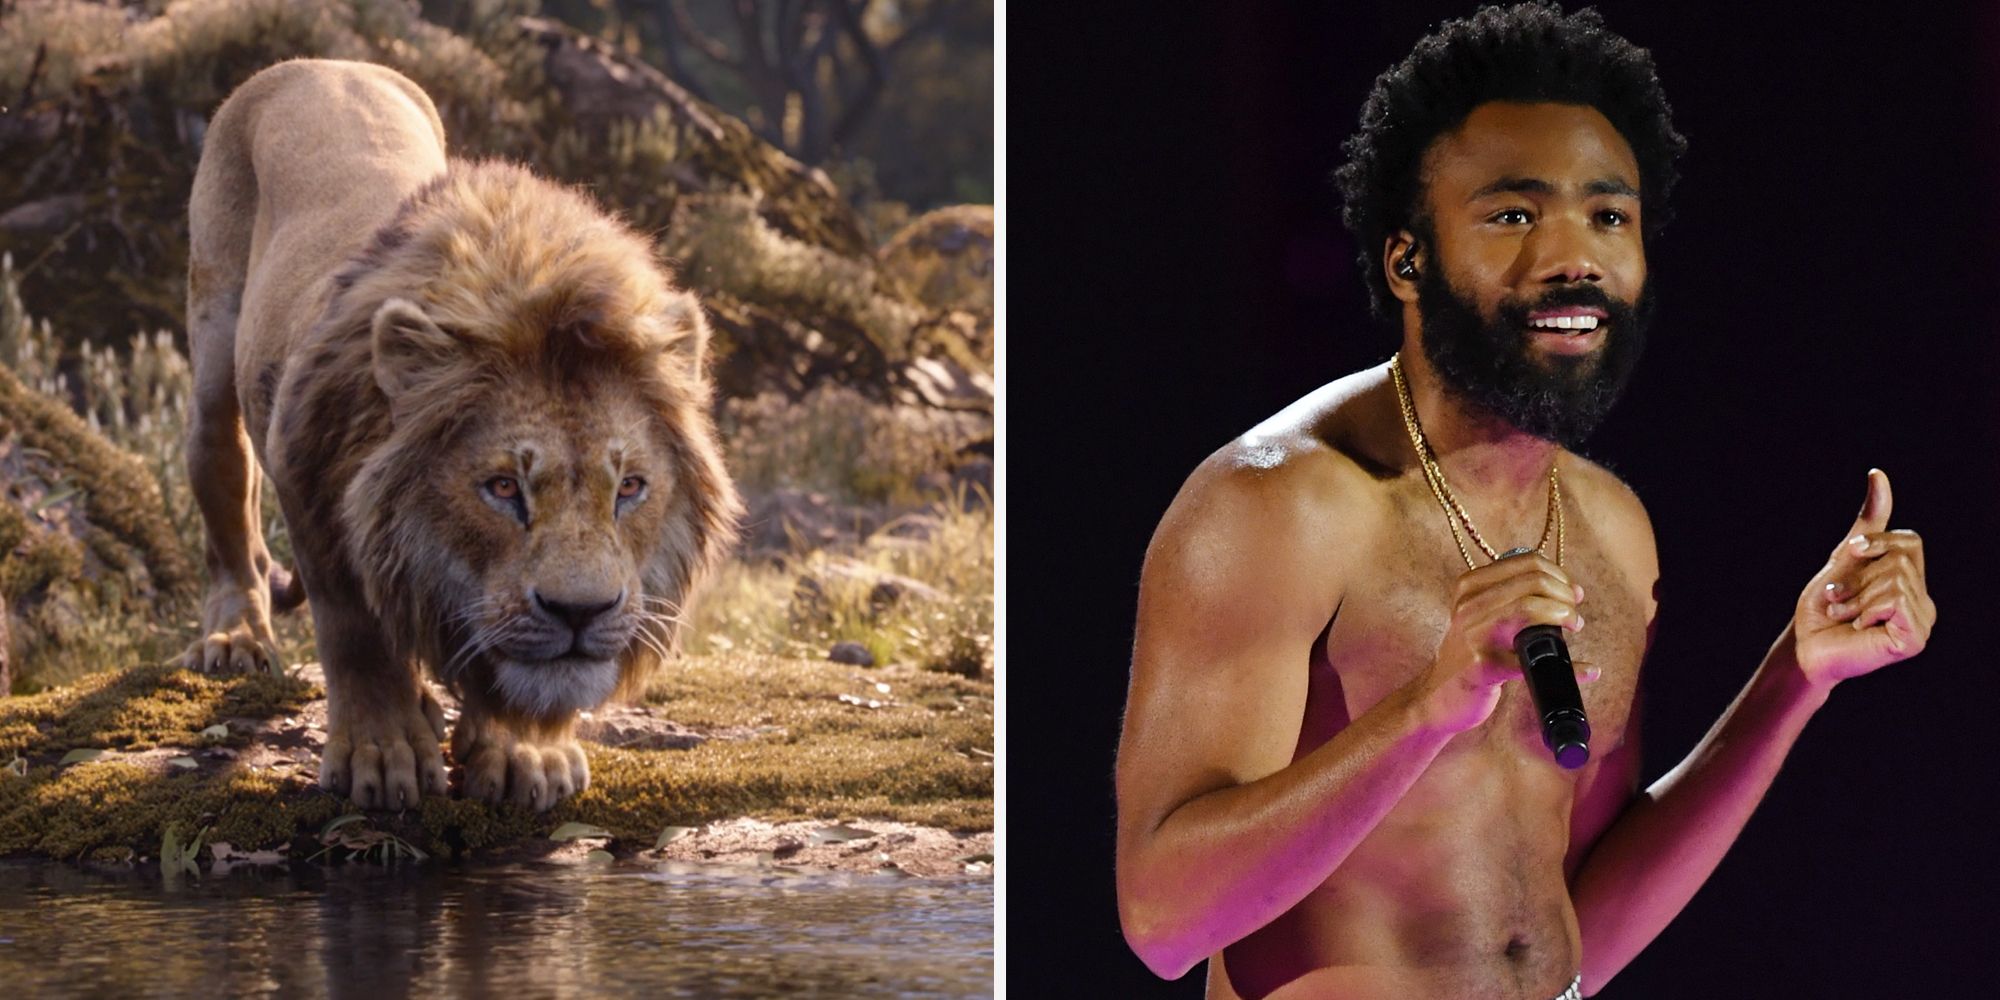 Lion King Live Action Full Cast List - Lion King Remake and Donald